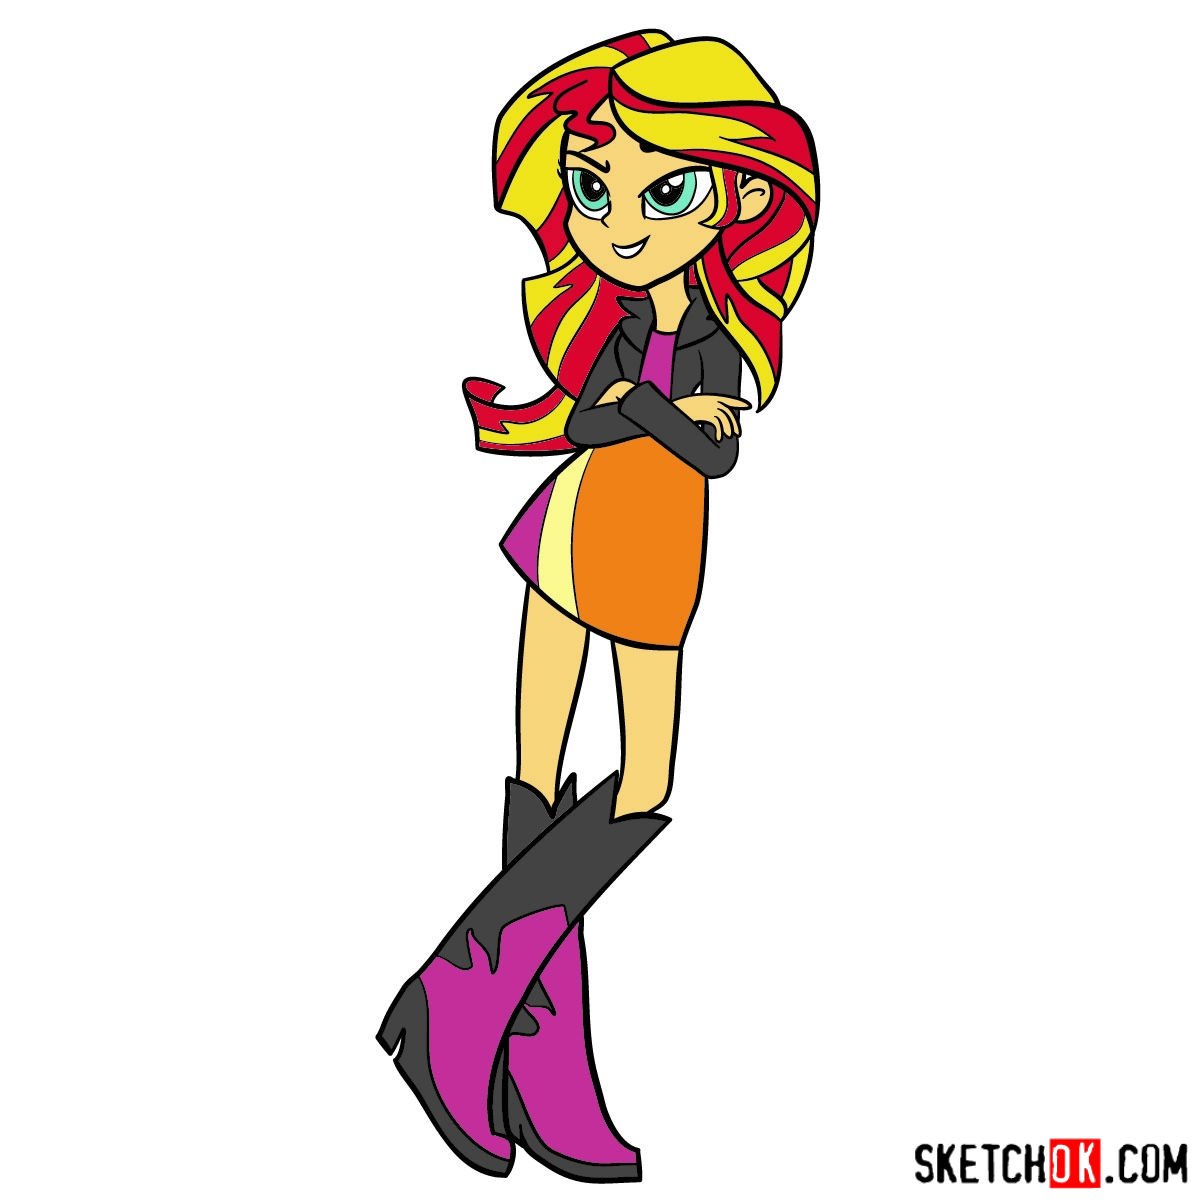 How to draw Sunset Shimmer - Equestria Girls